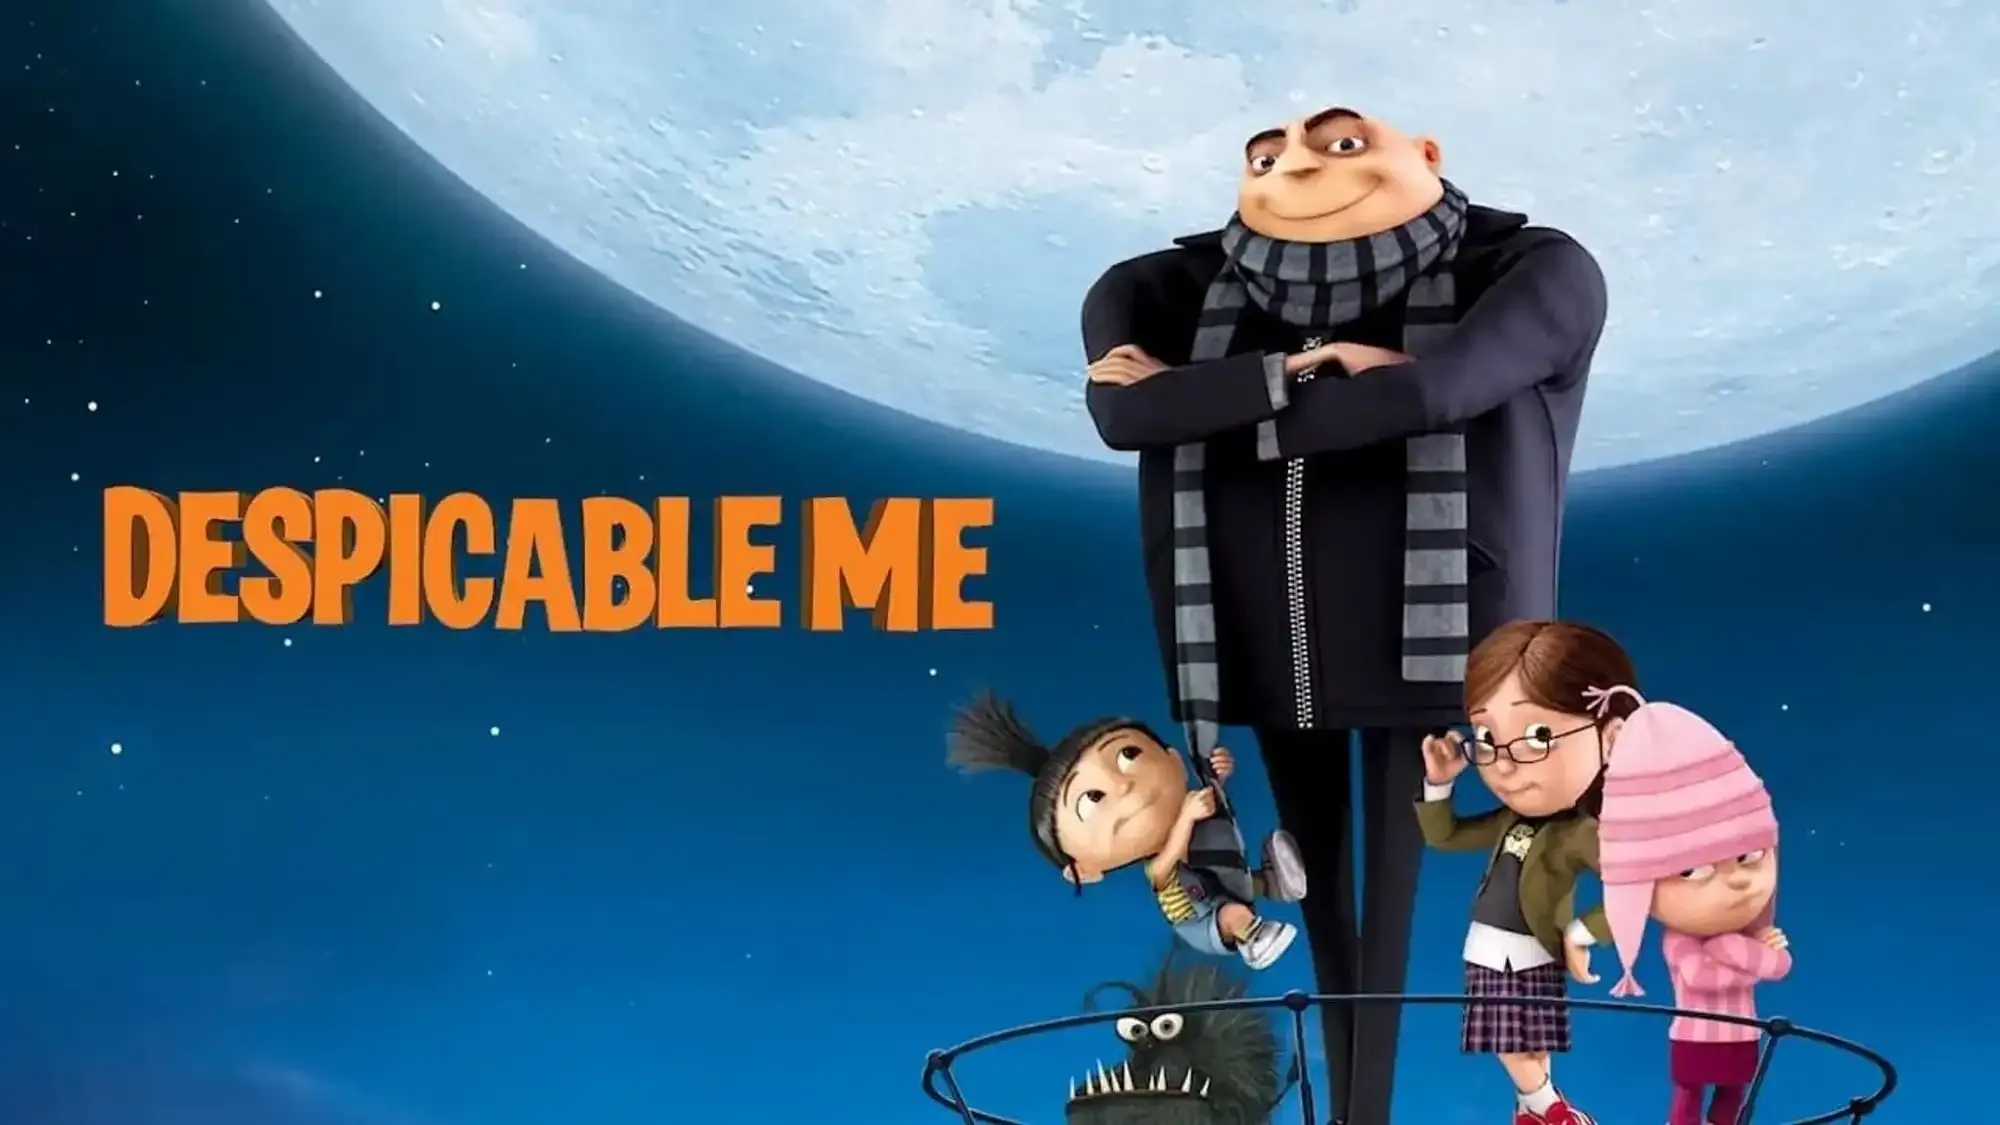 Despicable Me movie review